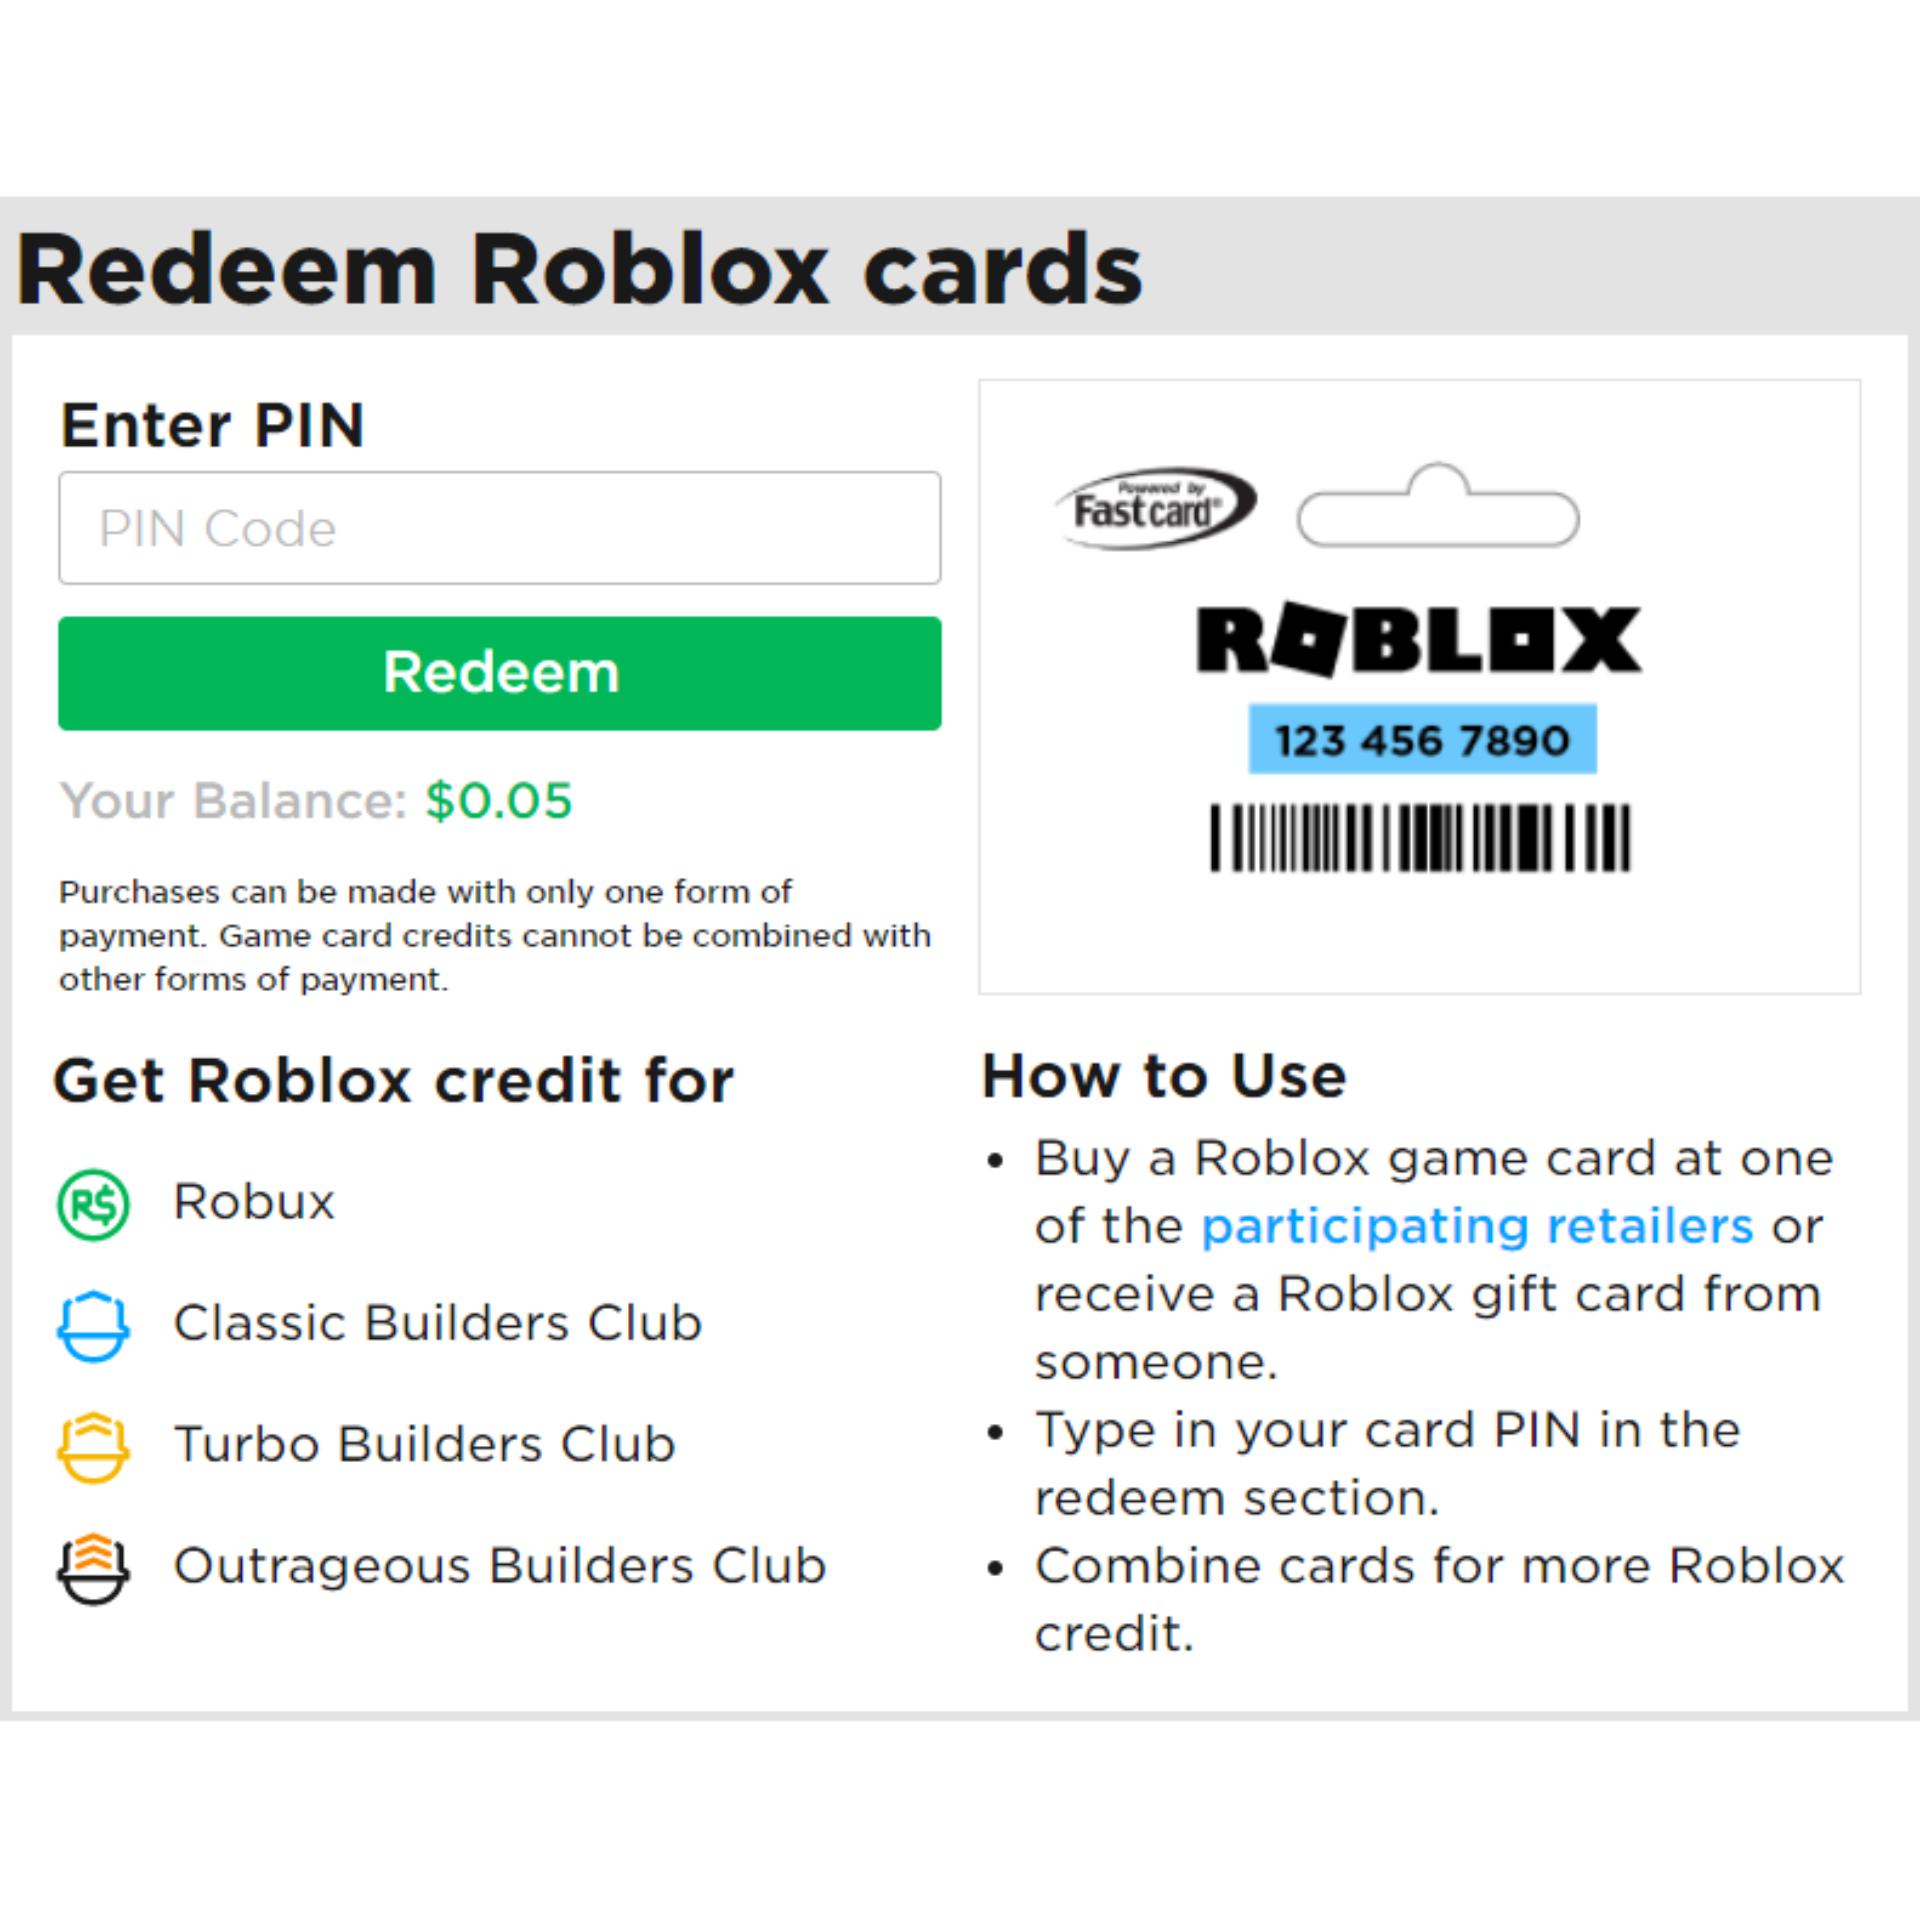 how much is roblox premium